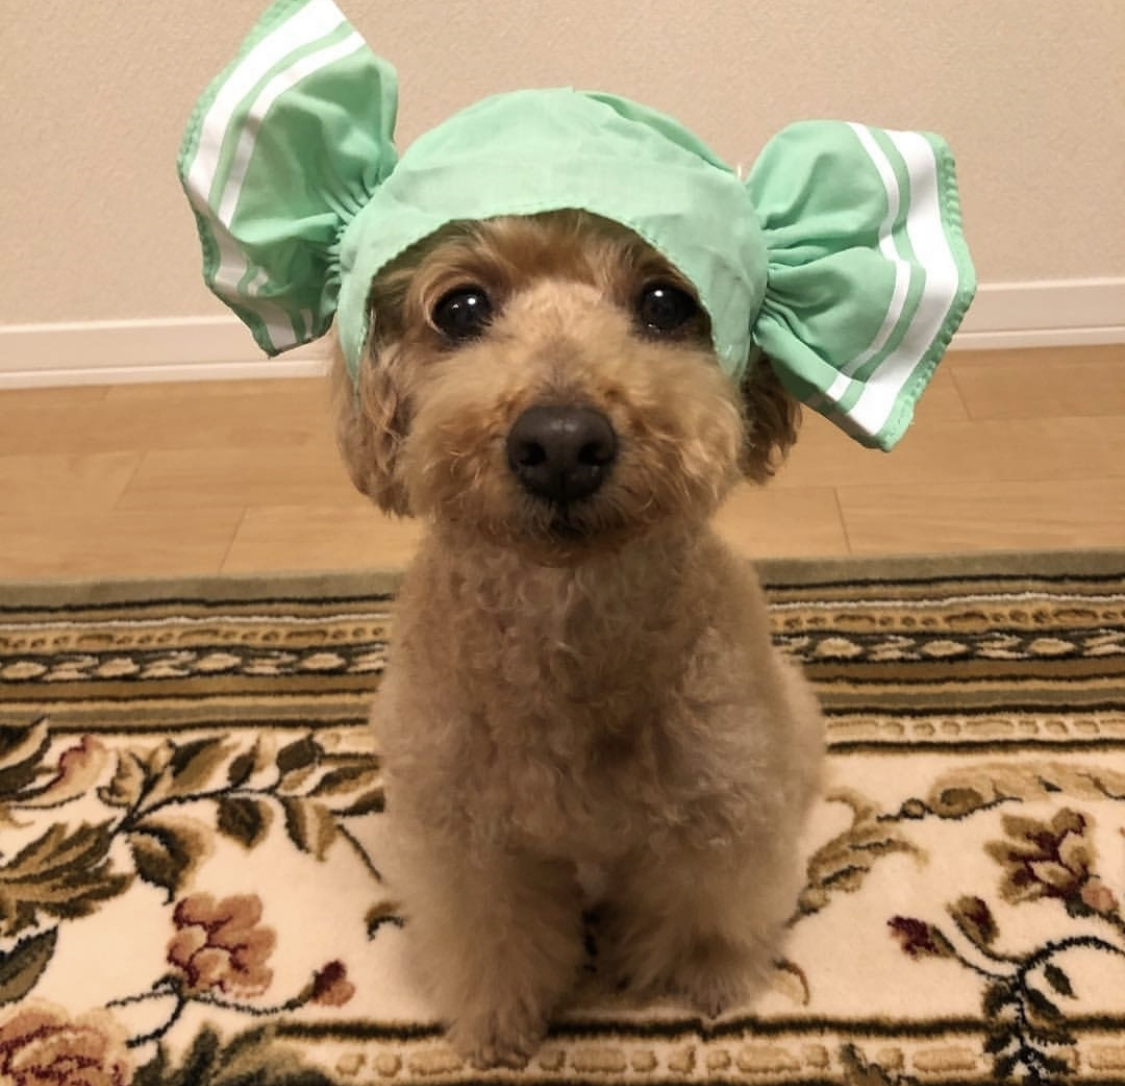 Yorkshire Terrier wearing a green candy headpiece sitting on the carpet